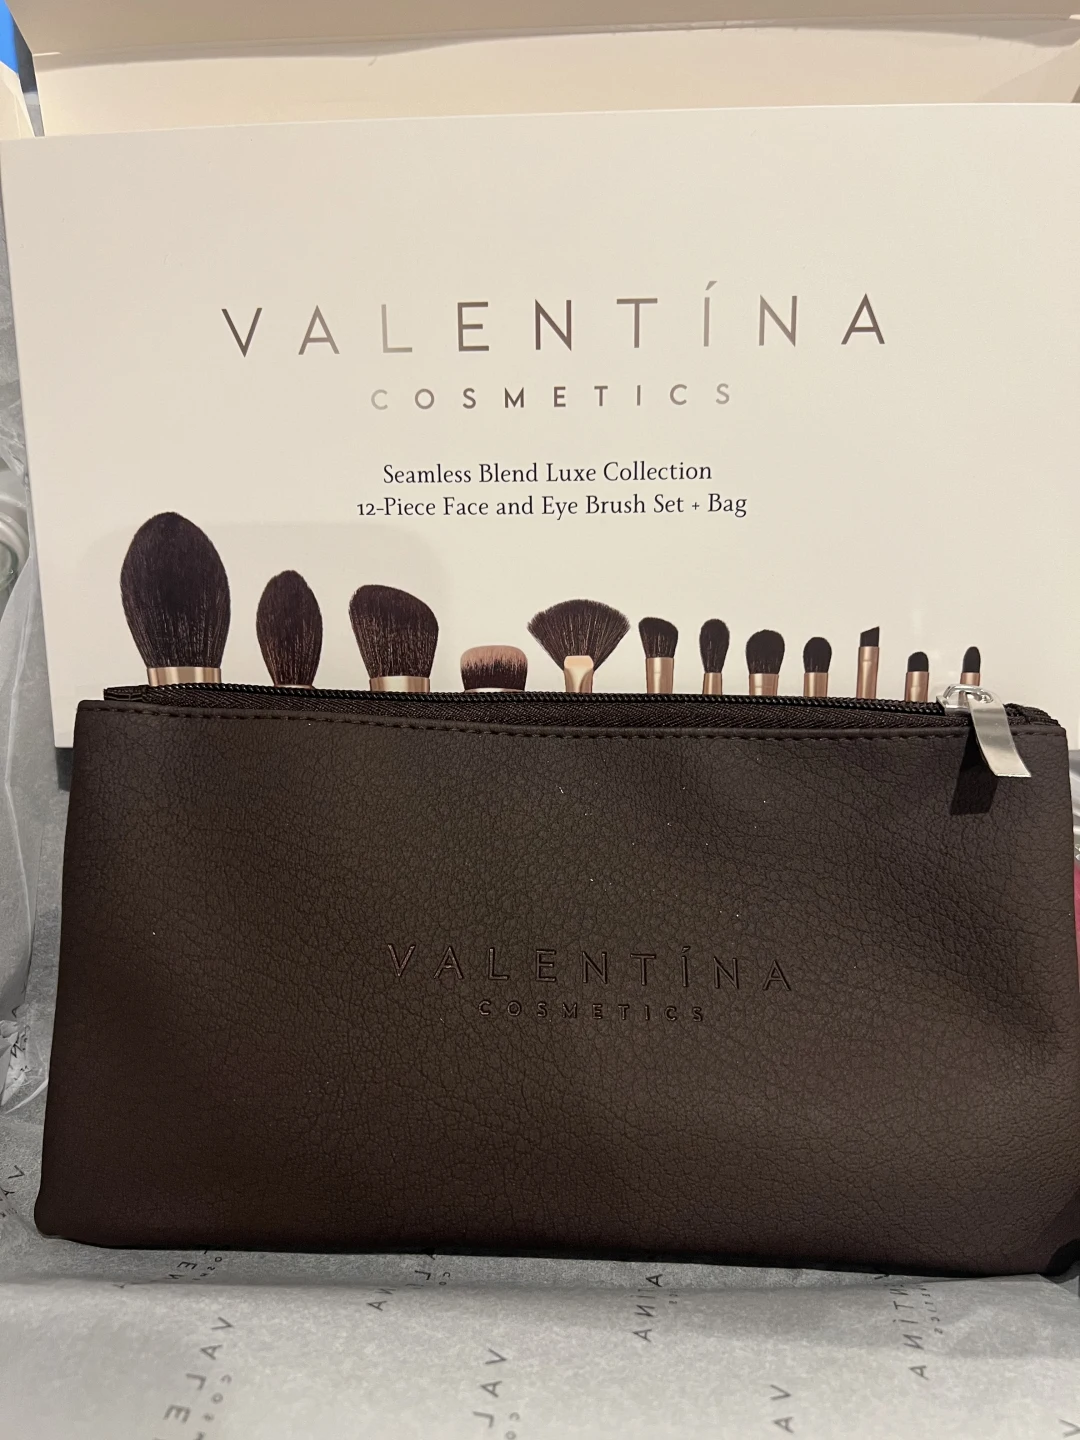 Seamless Blend Luxe Collection – Valentina Cosmetics